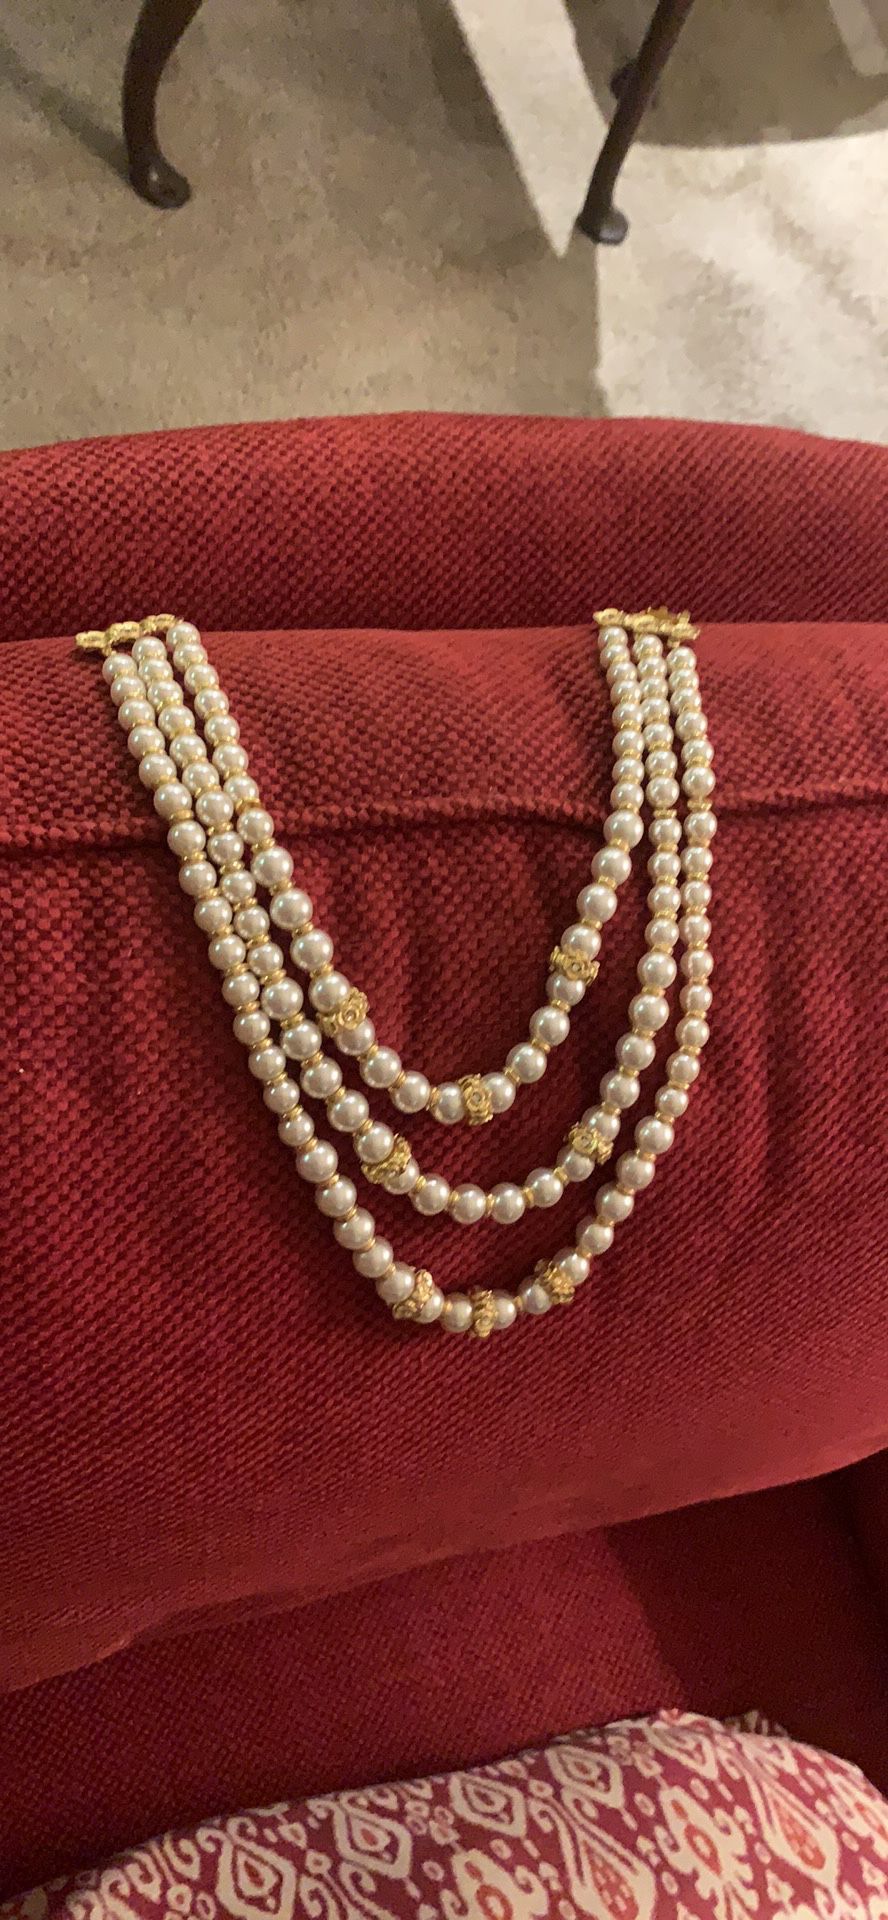 Stunning Vintage Three Strand Faux Pearl with Gold and Crystal Accents.